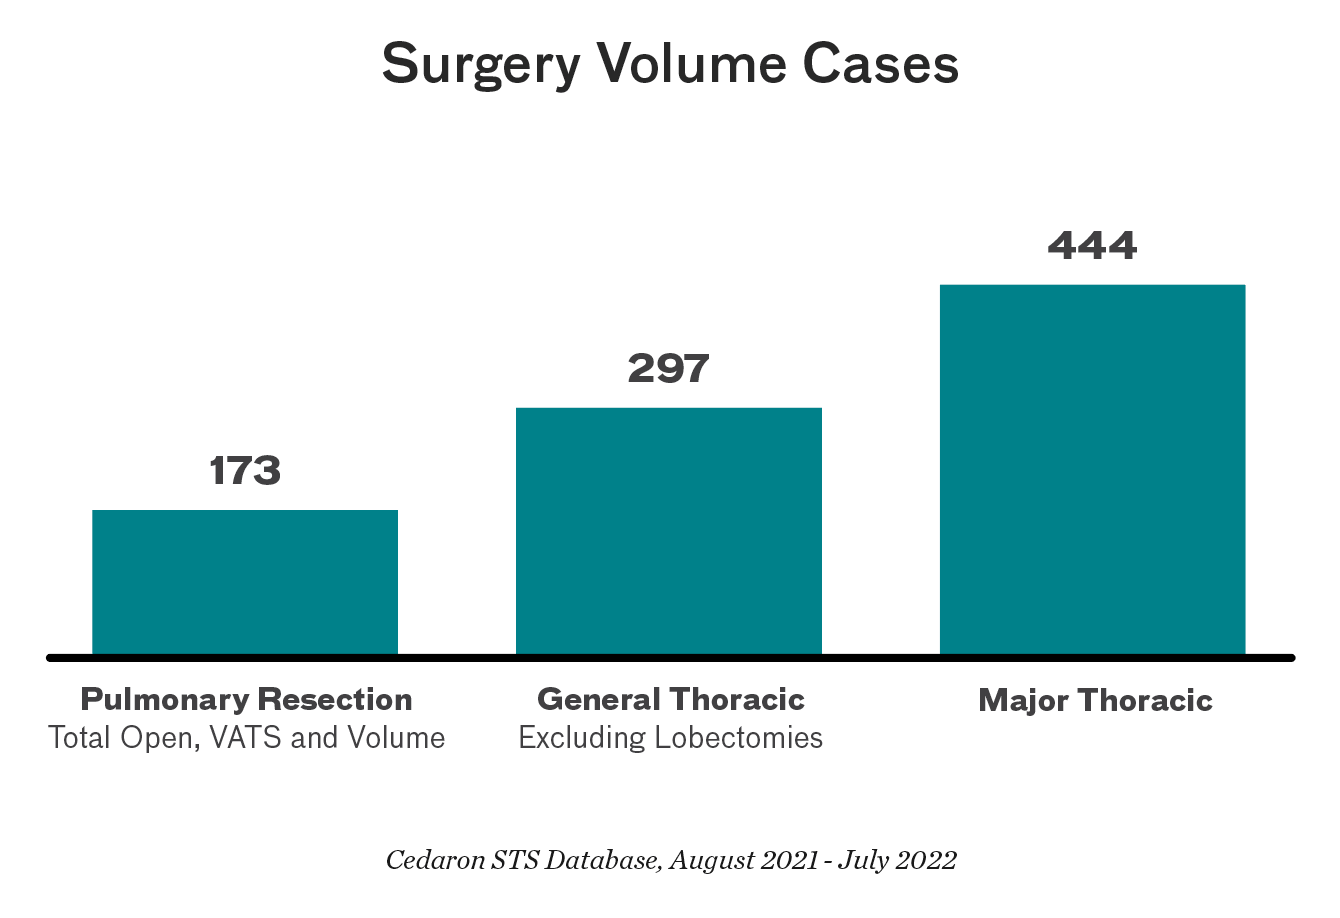 Chart showing types of Surgery Volume Cases (173 Pulmonary Resection Total Open, VATS and Volume, 297 General Thoracic Excluding Lobectomies, and 444 Major Thoracic).